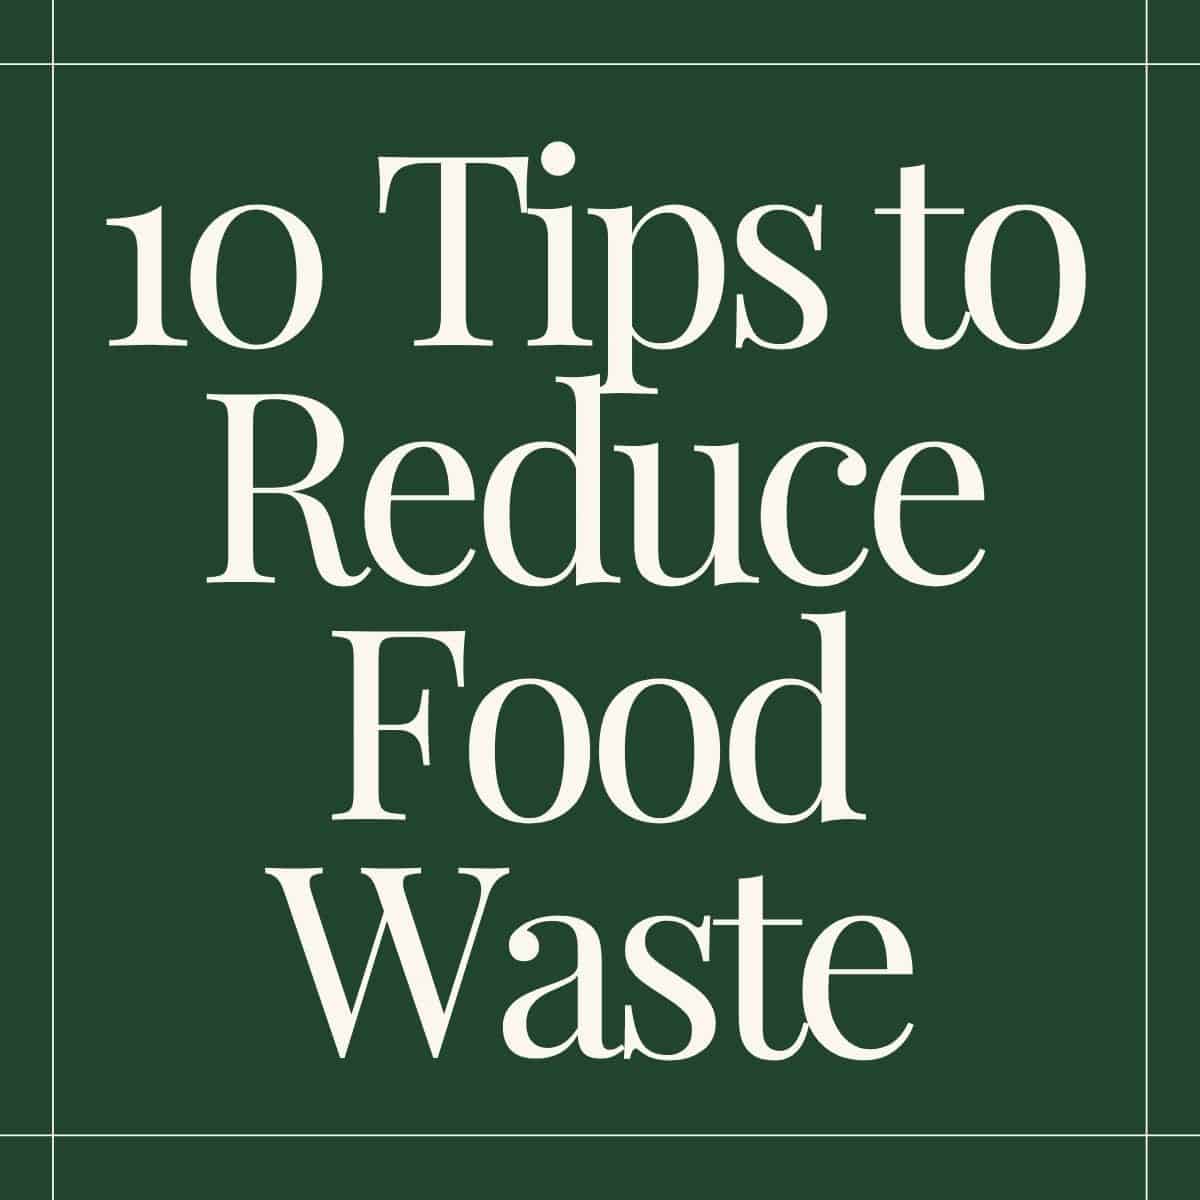 10 easy ways to reduce foodwaste.